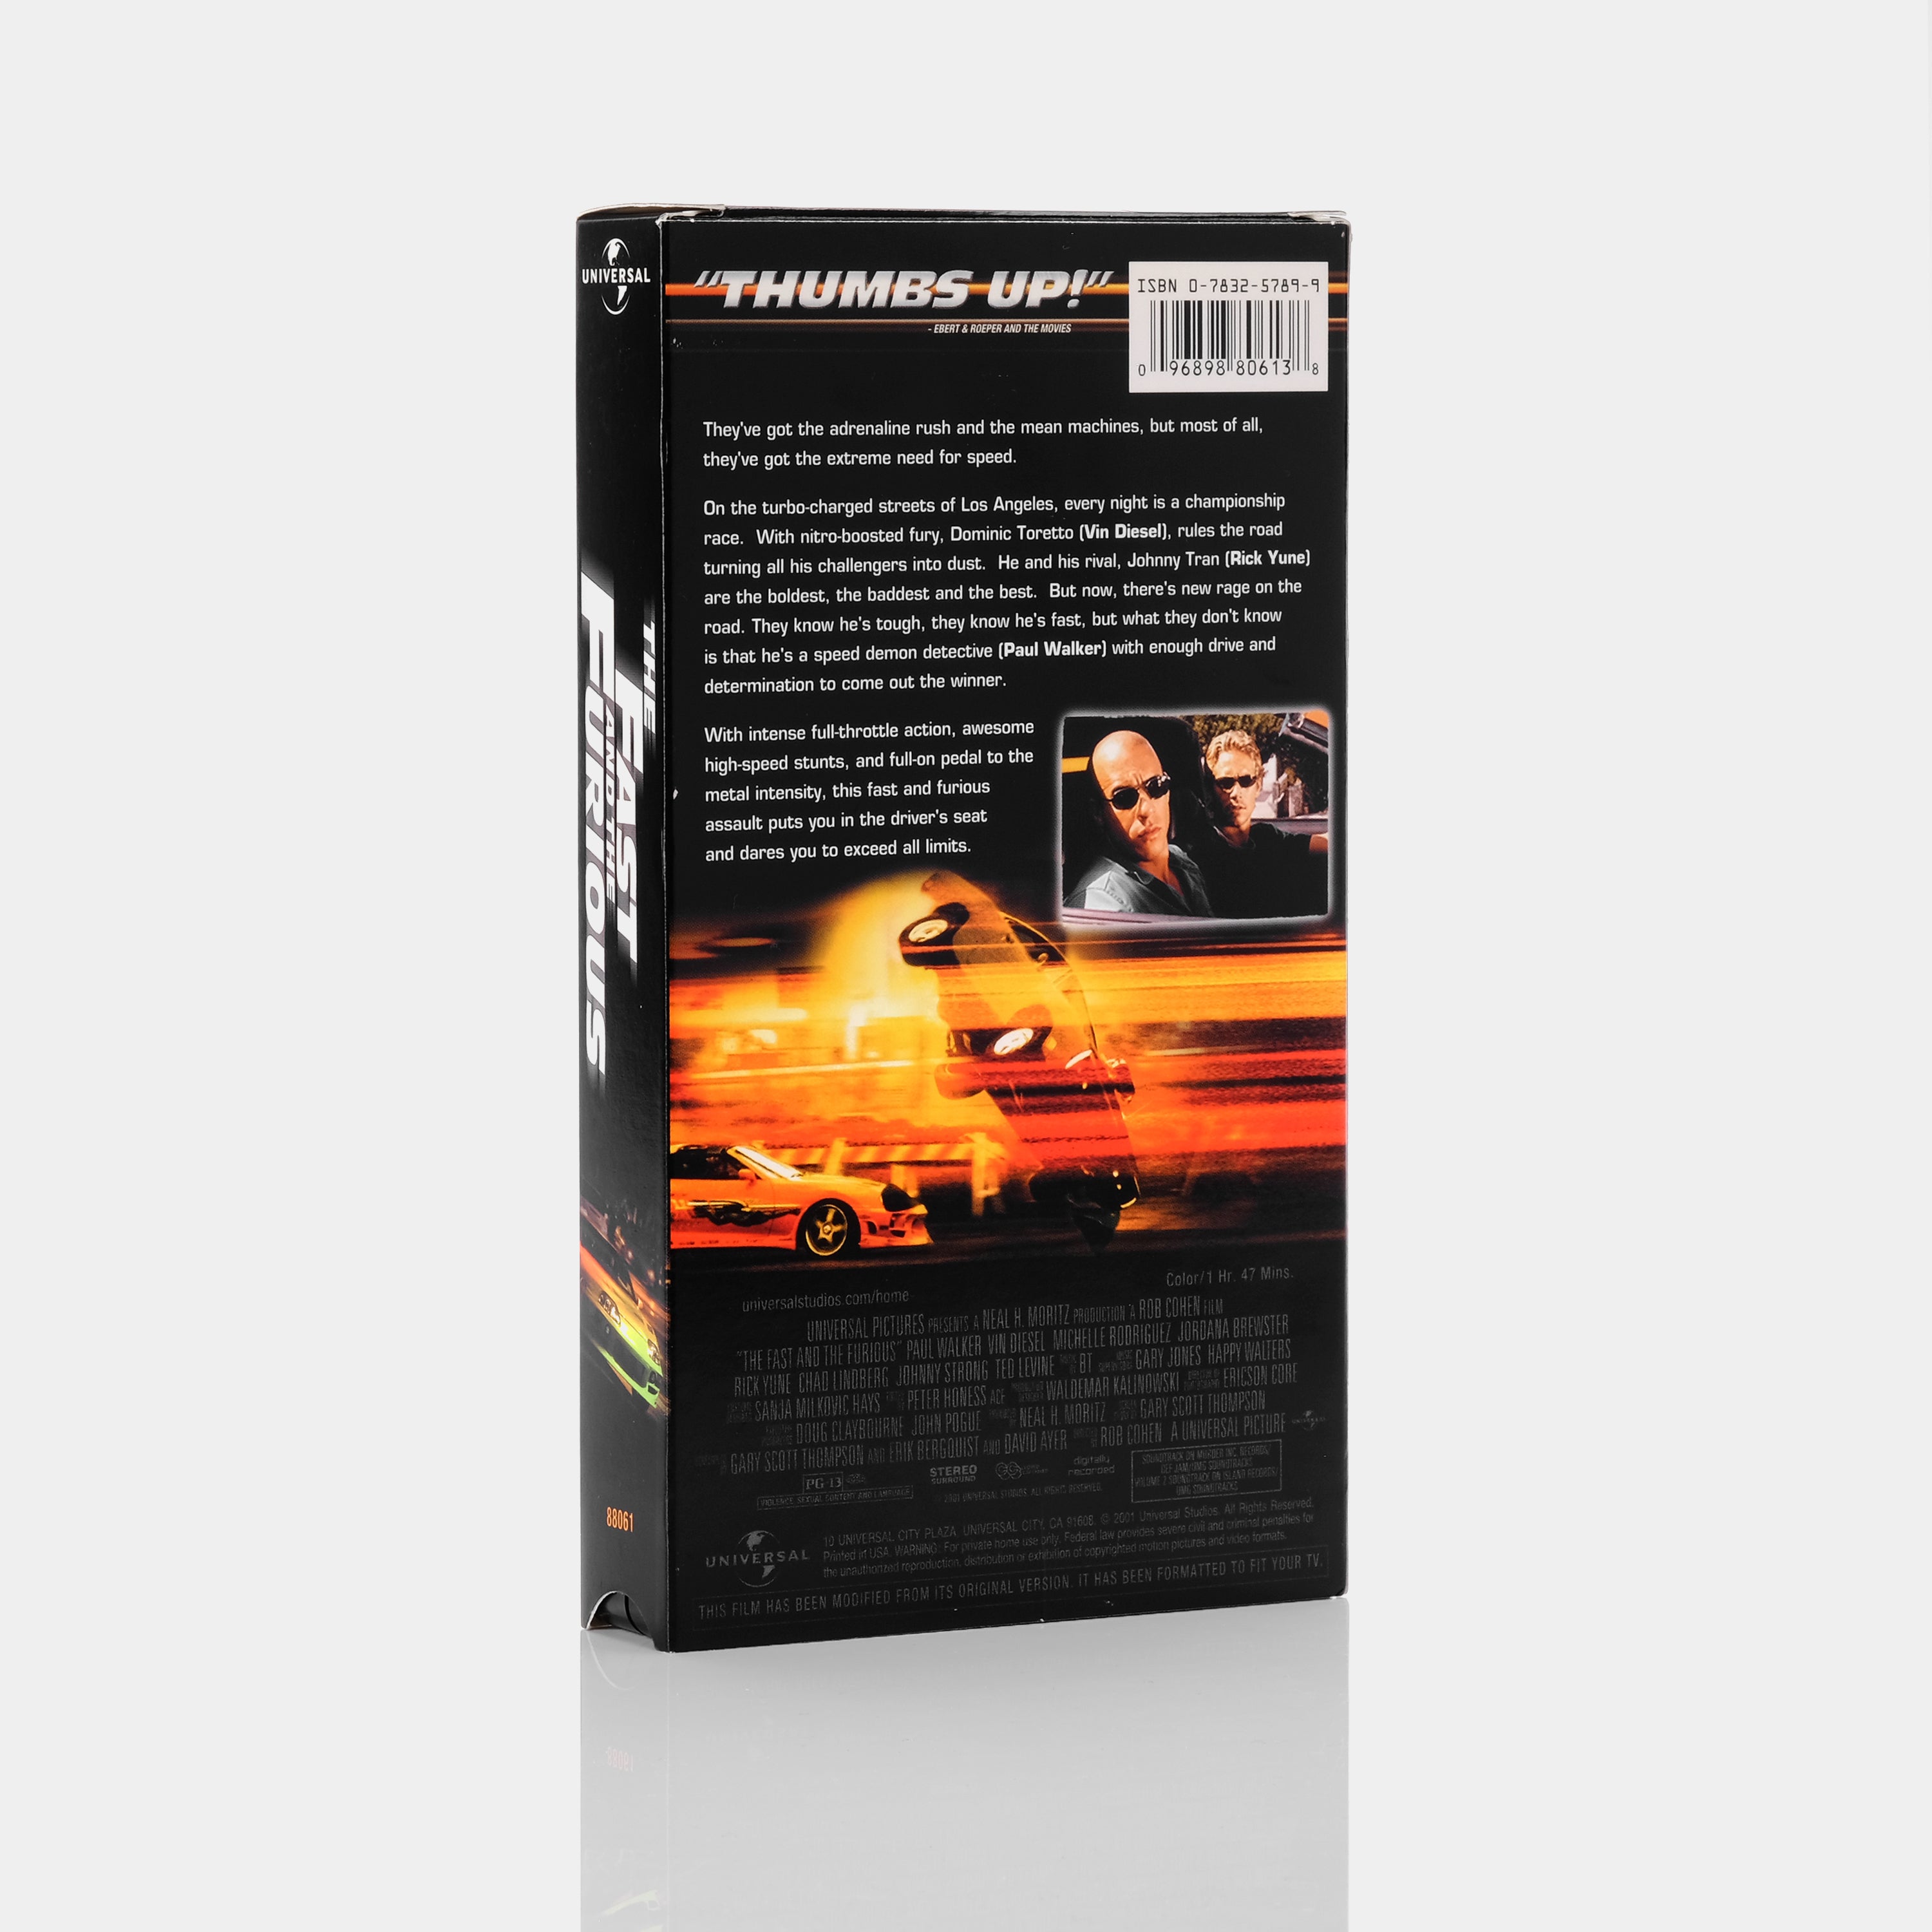 The Fast And The Furious VHS Tape